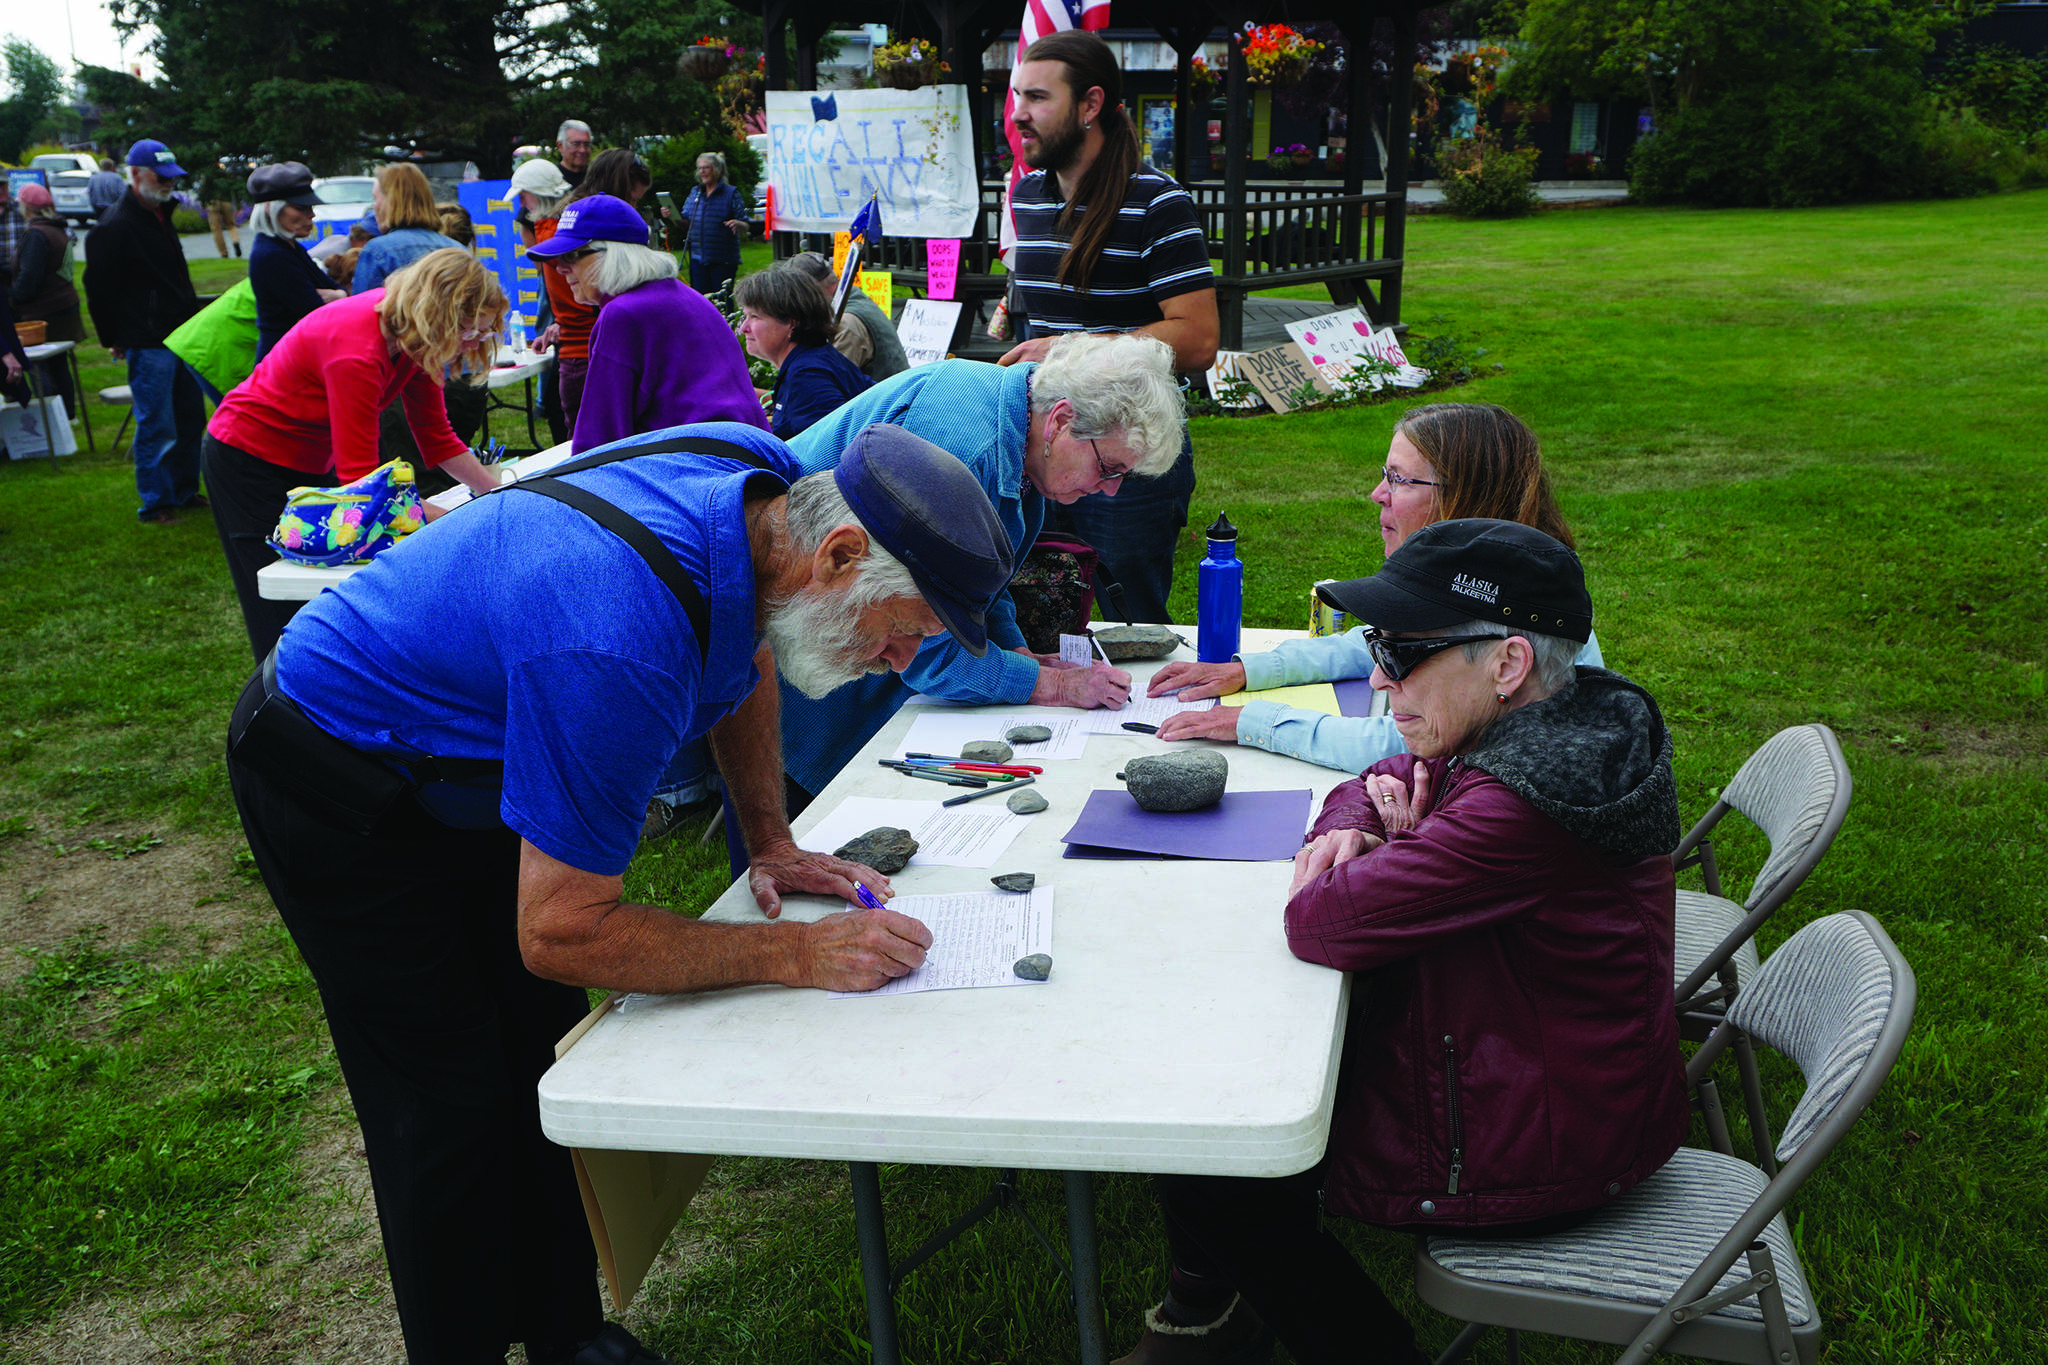 Recall Dunleavy organizers Ann Keffer, right, in hat, and Pat Cue, behind Keffer, take signatures at a Recall Dunleavy rally held on Aug. 1, 2019, at WKFL Park in Homer, Alaska. At left, former Homer Rep. Paul Seaton, NP-Homer, signs a form. Seaton lost to Rep. Sarah Vance, R-Homer, in the general election. (Photo by Michael Armstrong)